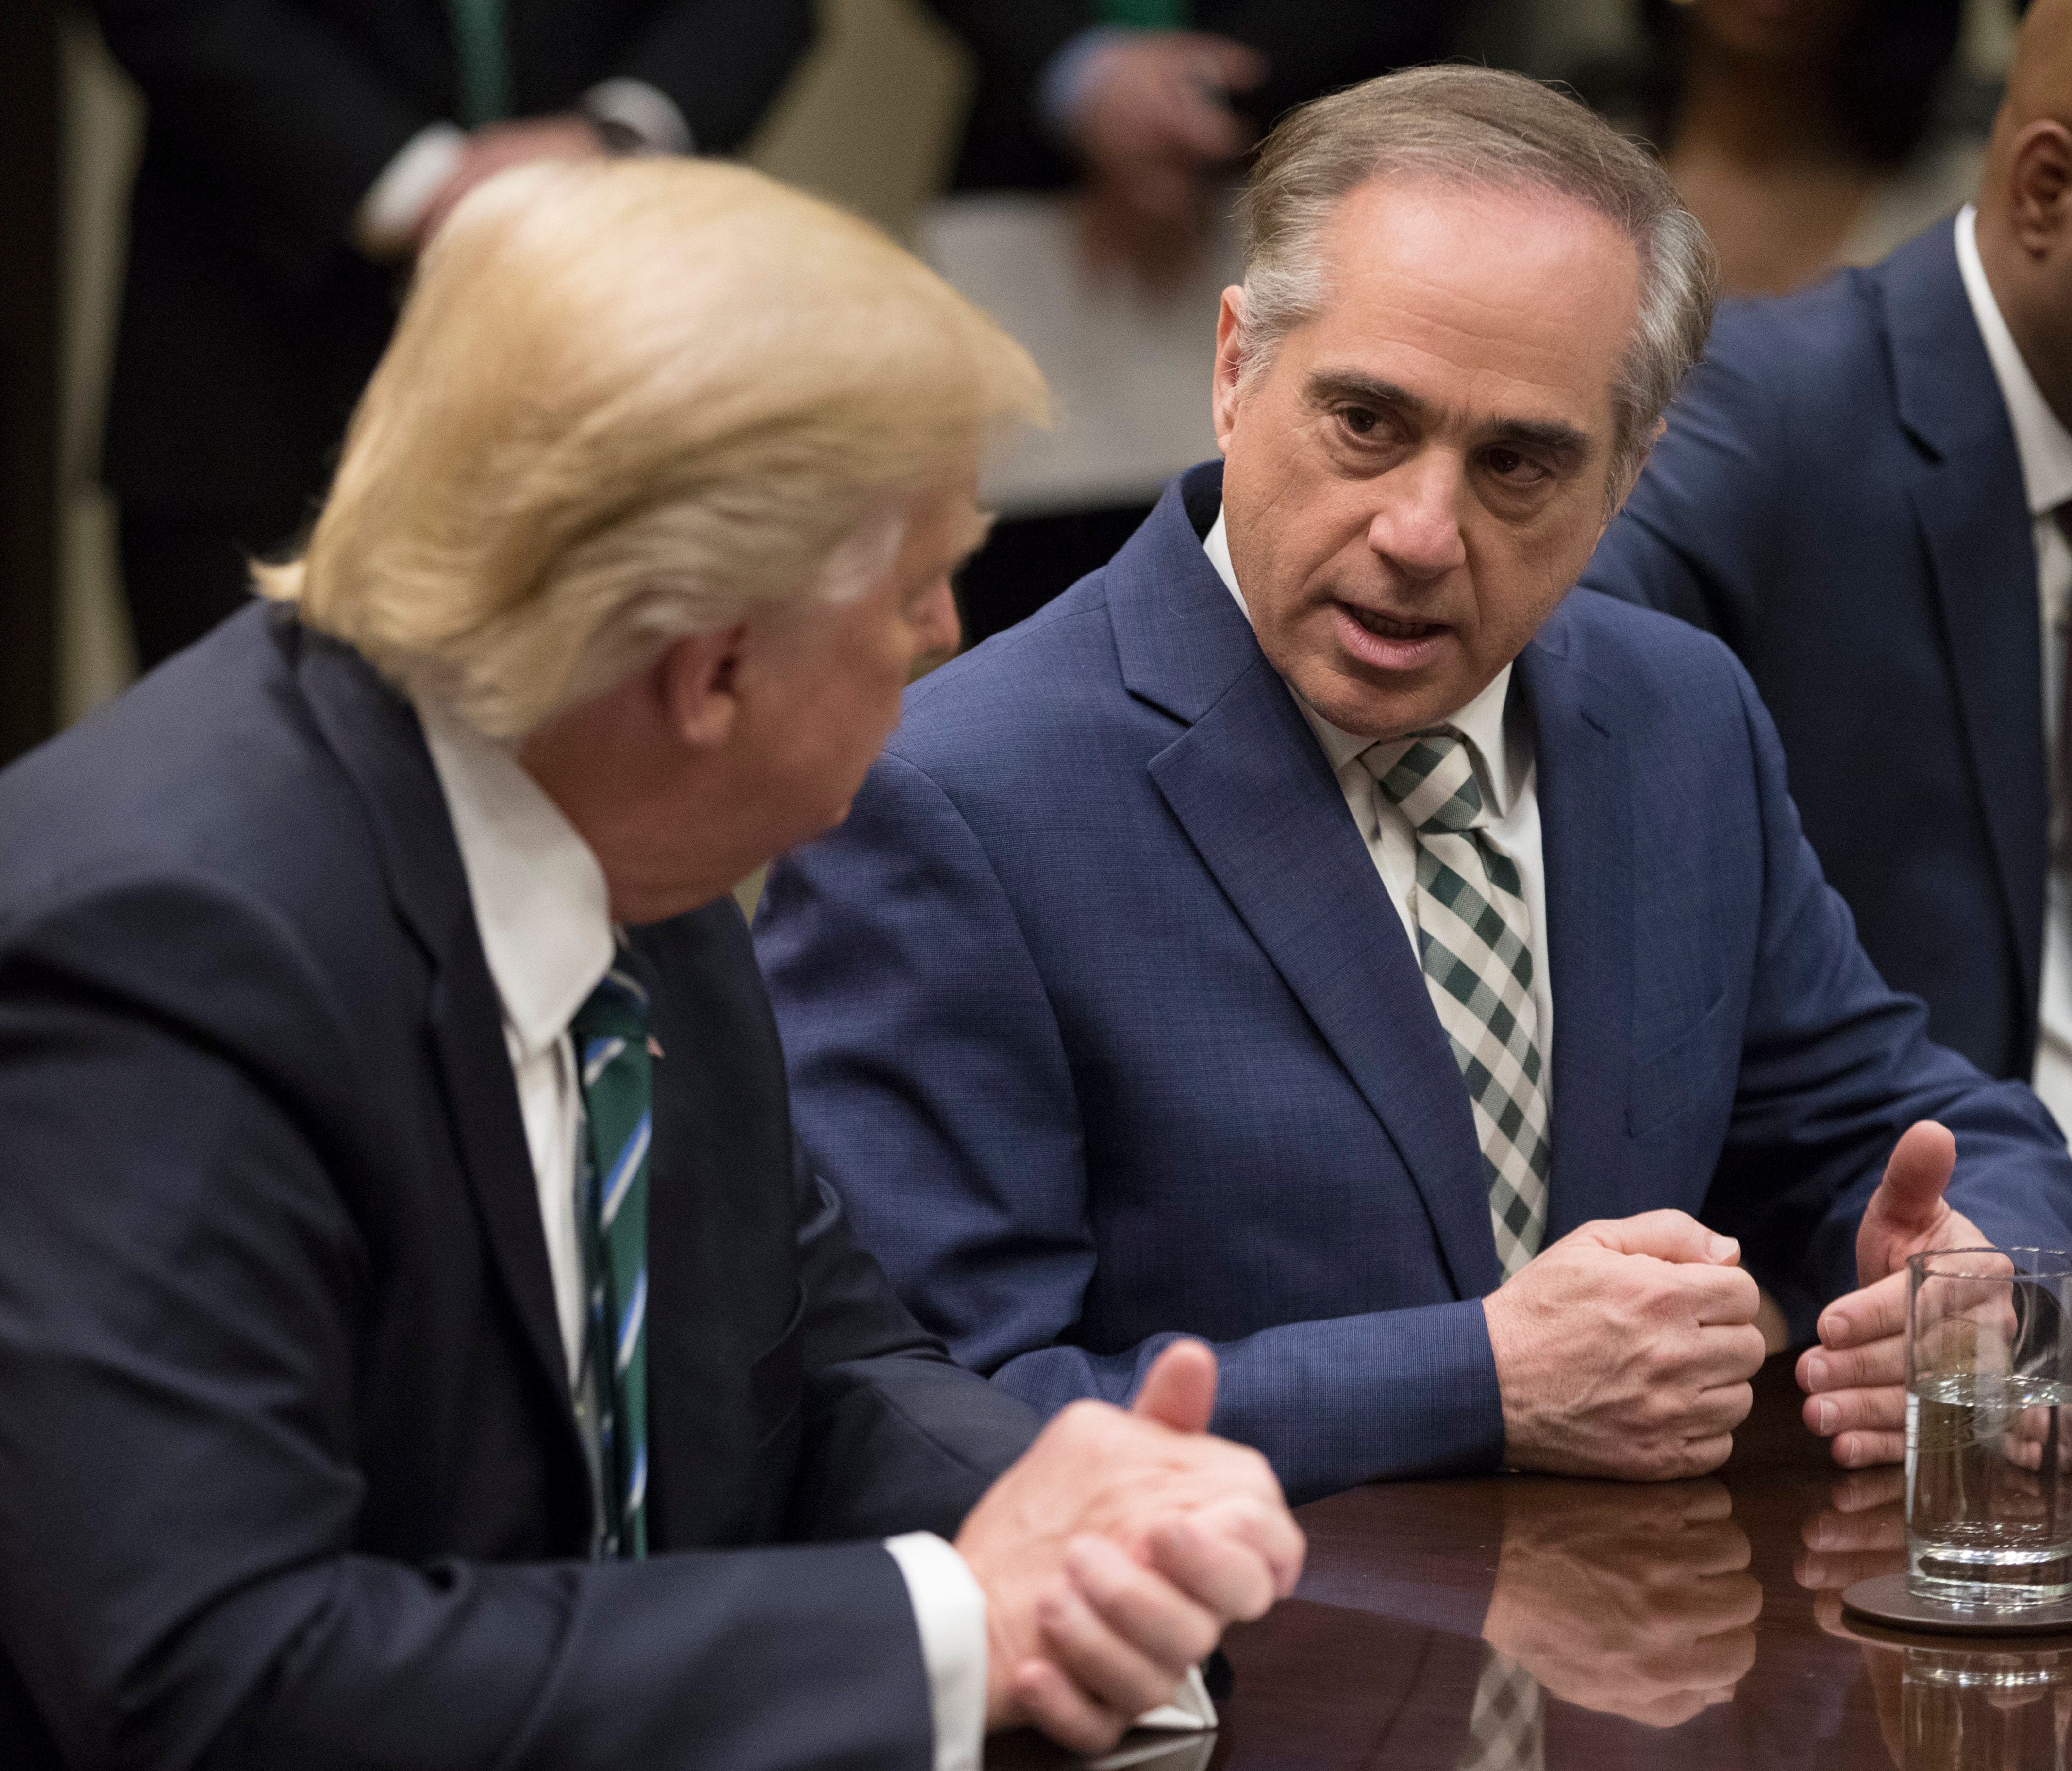 President Trump listens to VA Secretary David Shulkin during a meeting about veterans' affairs at the White House on March 17, 2017.